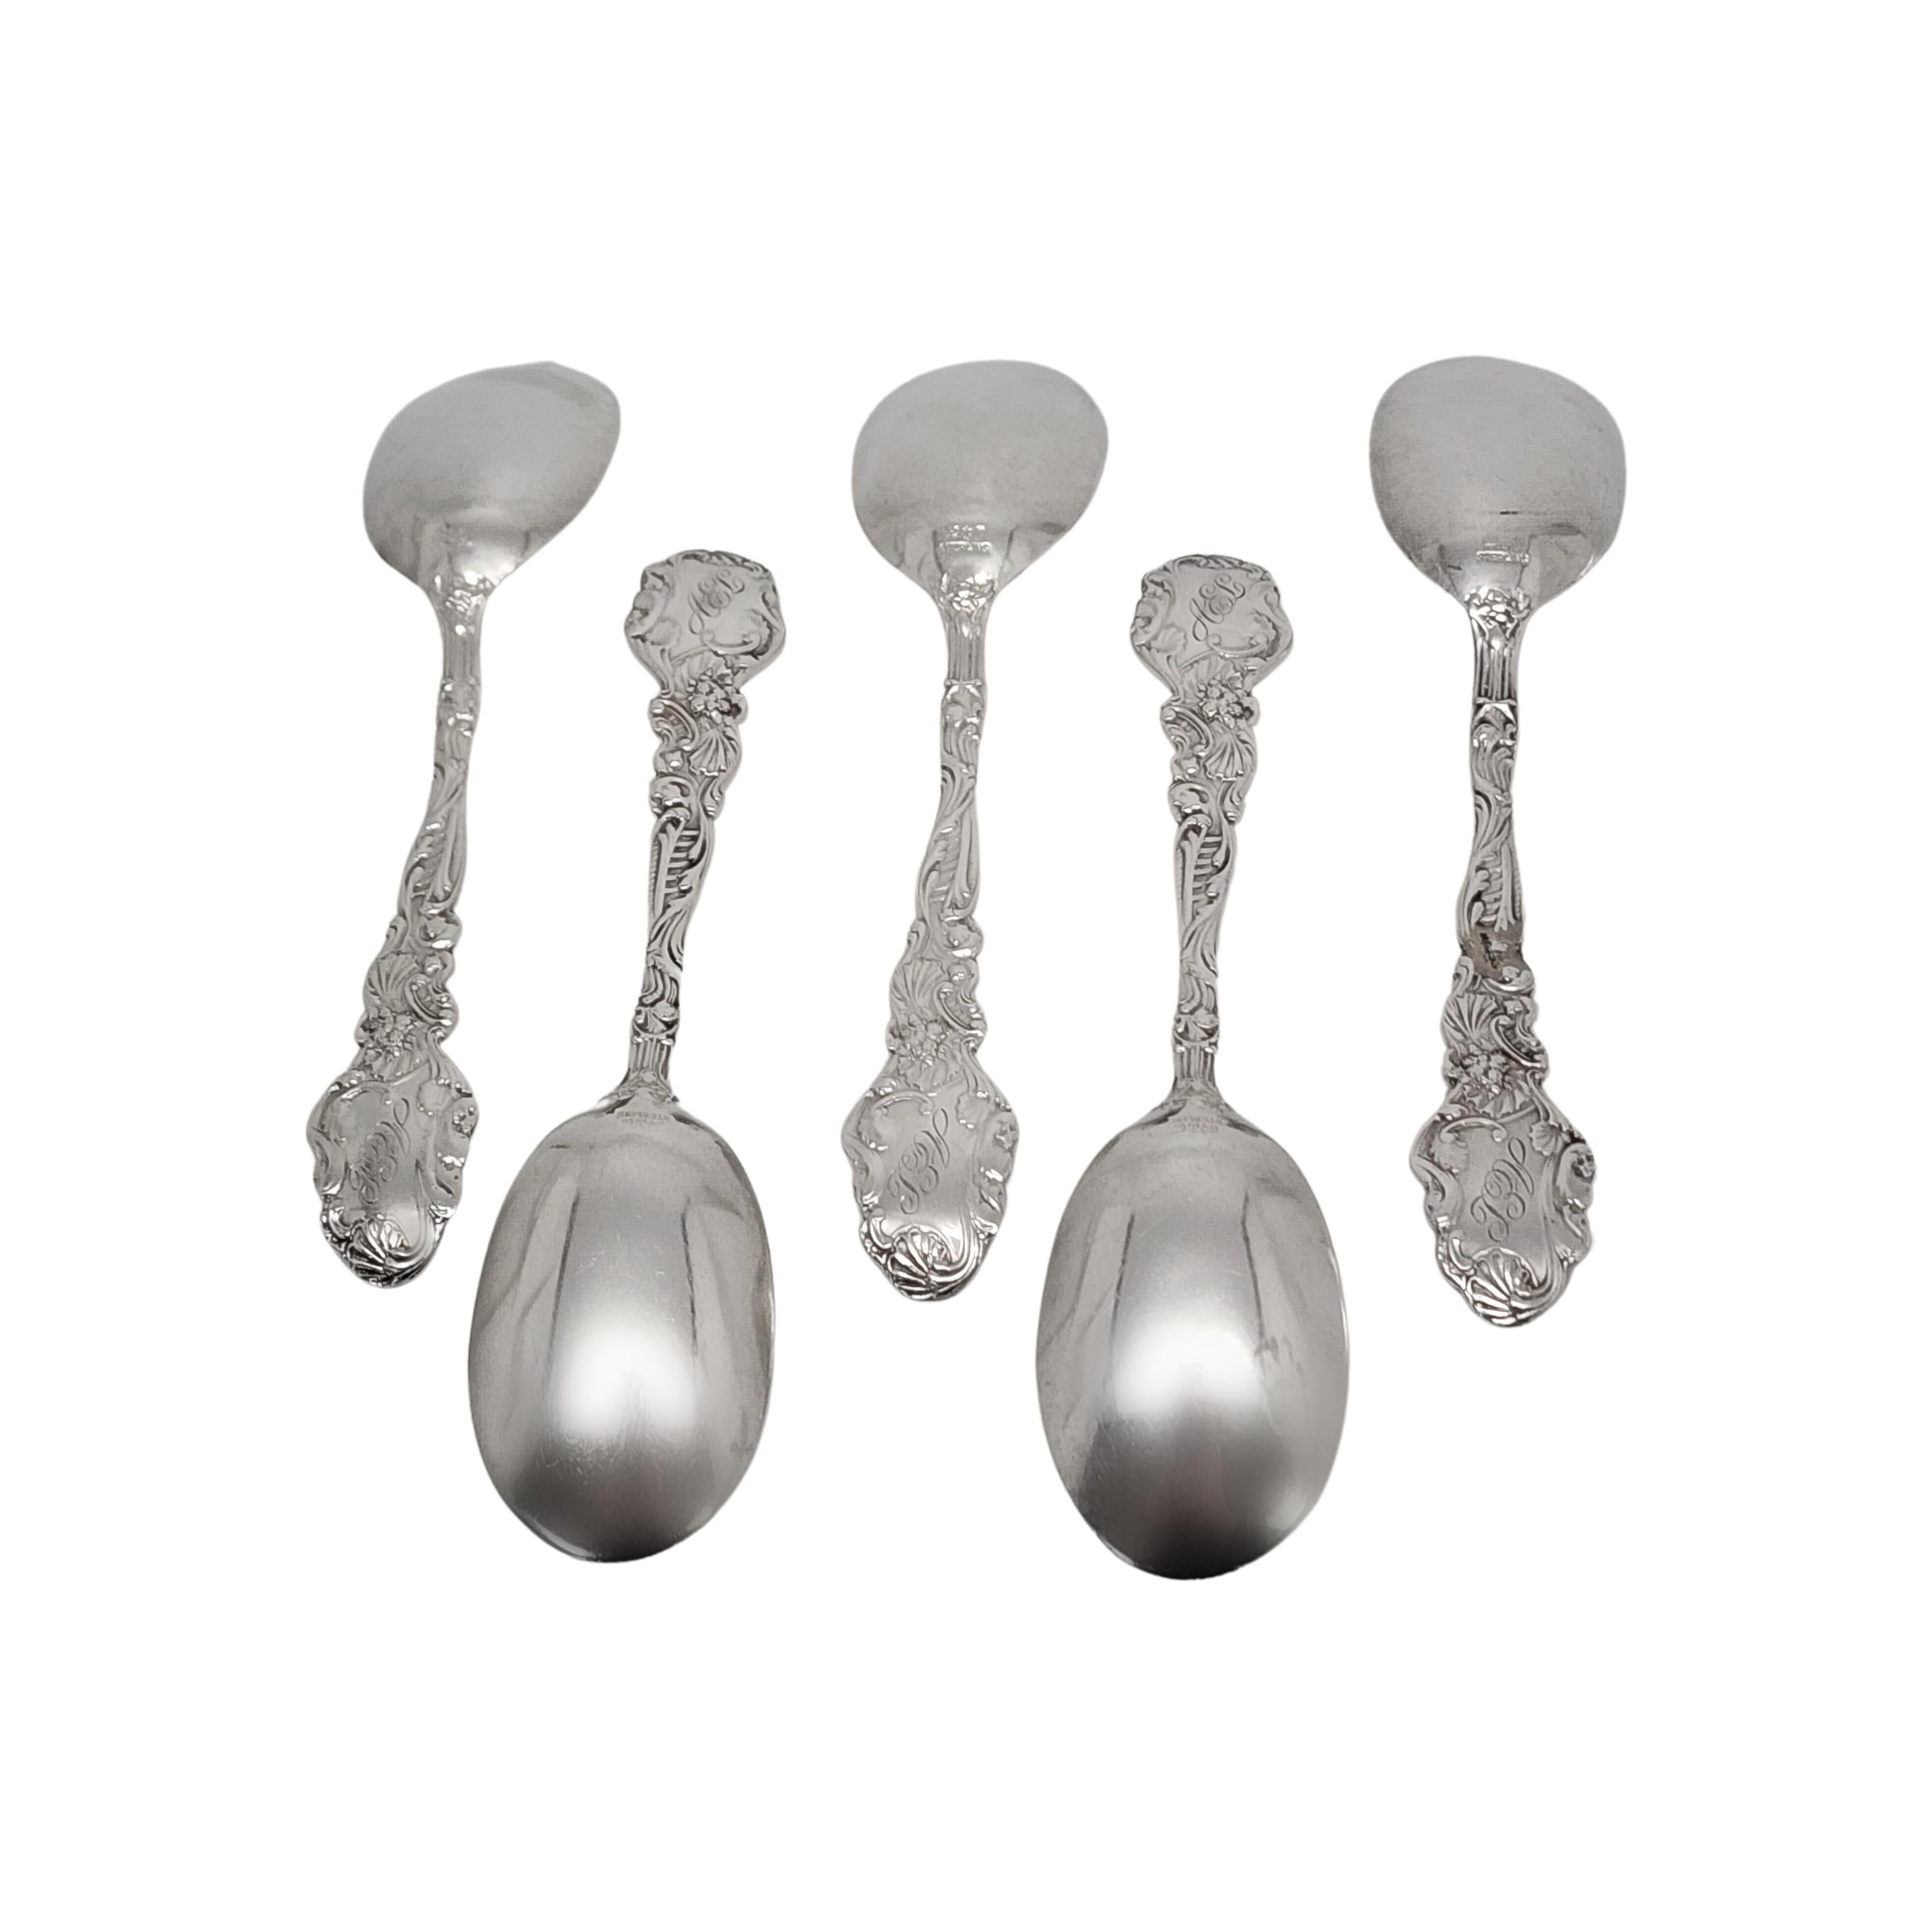 Set of 5 sterling silver small ice cream spoons by Gorham in the Versailles pattern with monogram.

Monogram appears to be AEL on the back of the handle

Gorham's Versailles is a multi motif pattern designed by Antoine Heller in 1885. Named for the